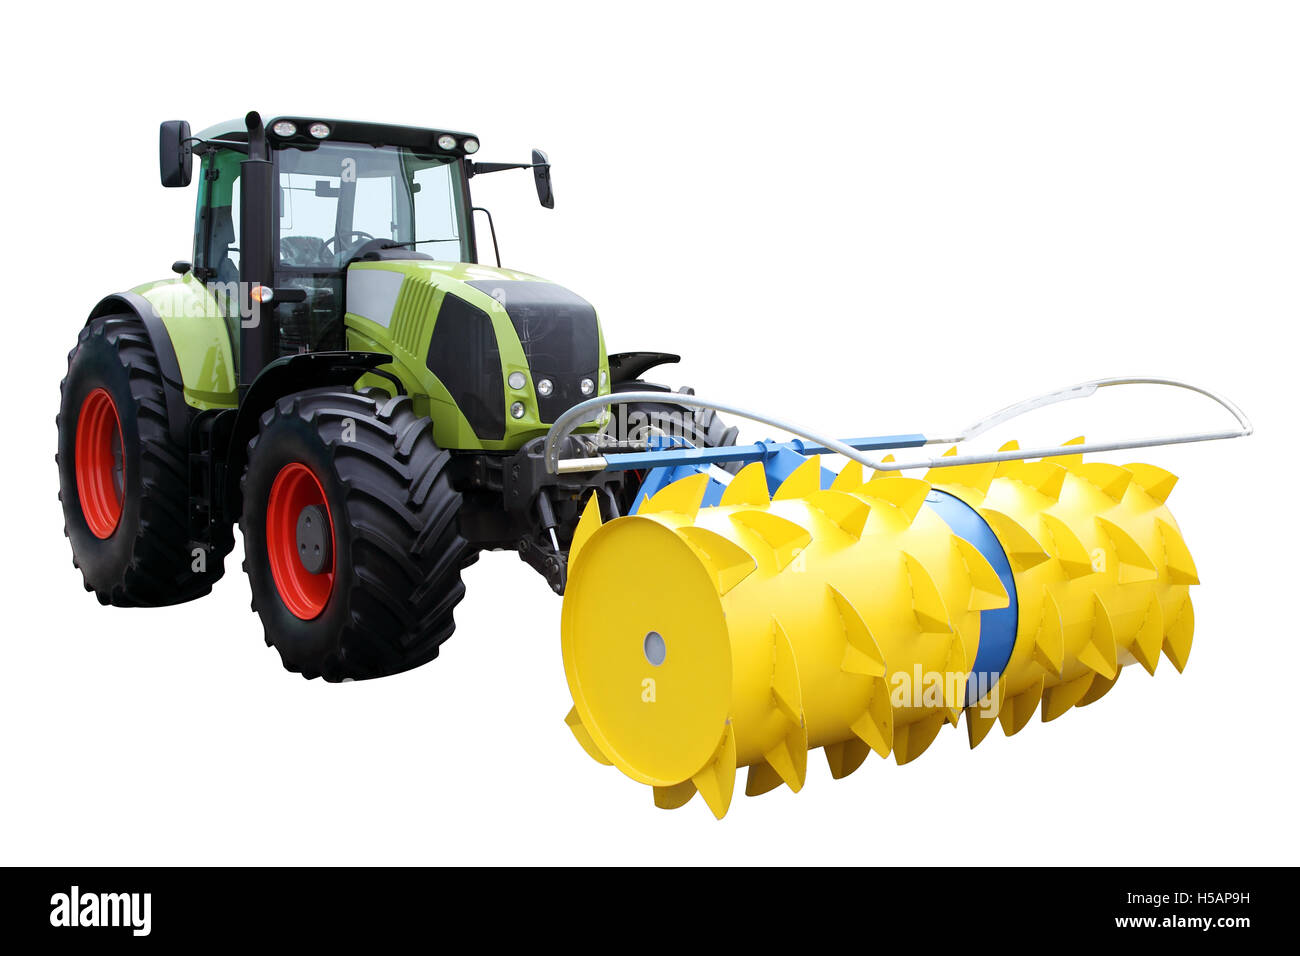 Green tractor separately on a white background Stock Photo